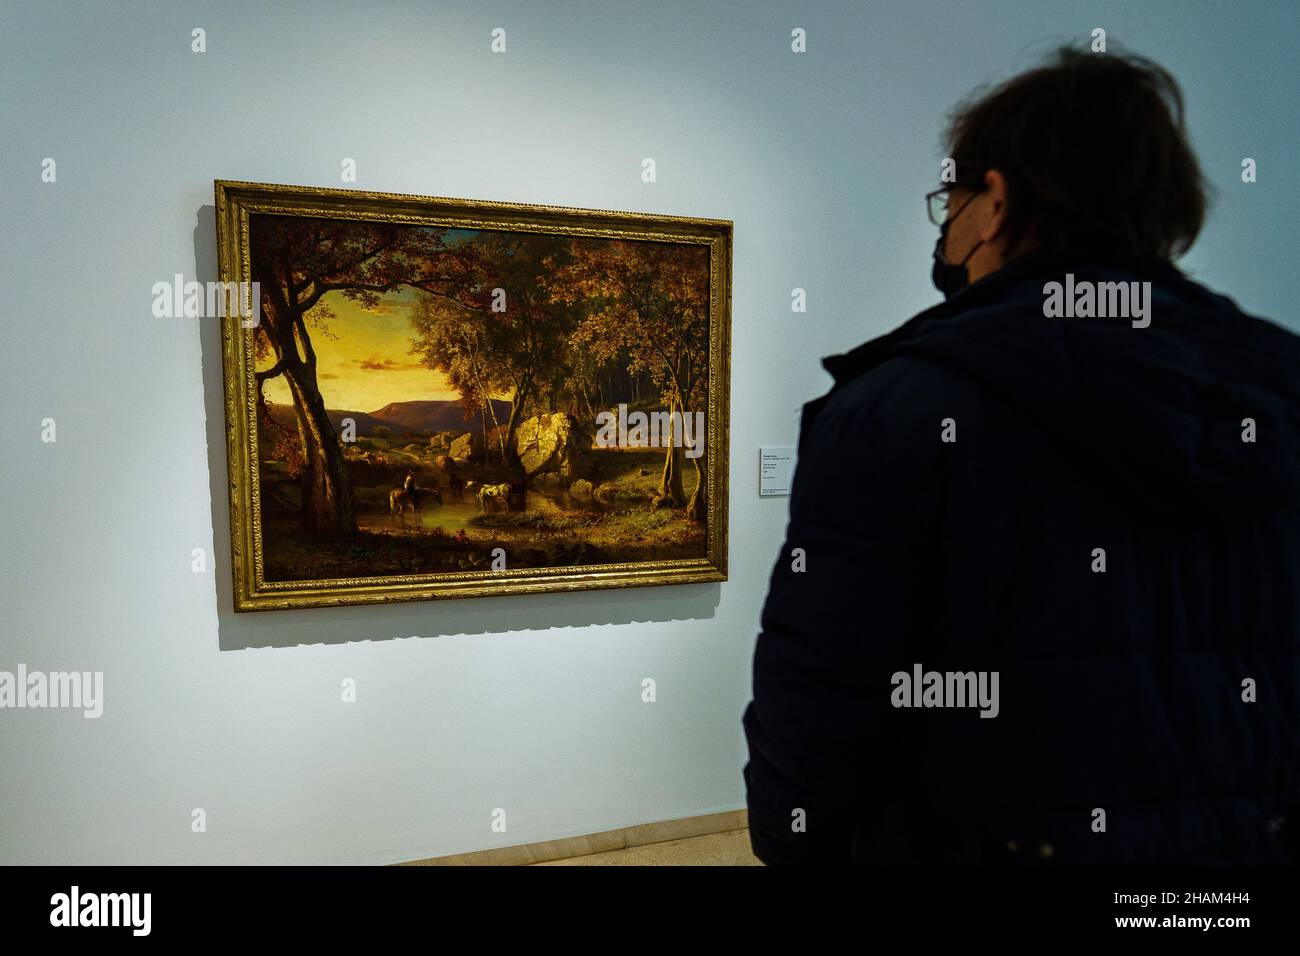 A visitor observes the artwork of the artist George Inness during the exhibition at the Museo Nacional Thyssen-Bornemisza in Madrid.The Museo Nacional Thyssen-Bornemisza presents an exhibition that brings together the magnificent collection of American art, the fruit of his collecting work for more than three decades. The works come with both the collections of the Thyssen family and Carmen Thyssen-Bornemisza and, mainly, from the museum itself, an exceptional set in the European context that has made the Thyssen Museum in Madrid an essential point of reference for the knowledge of the America Stock Photo